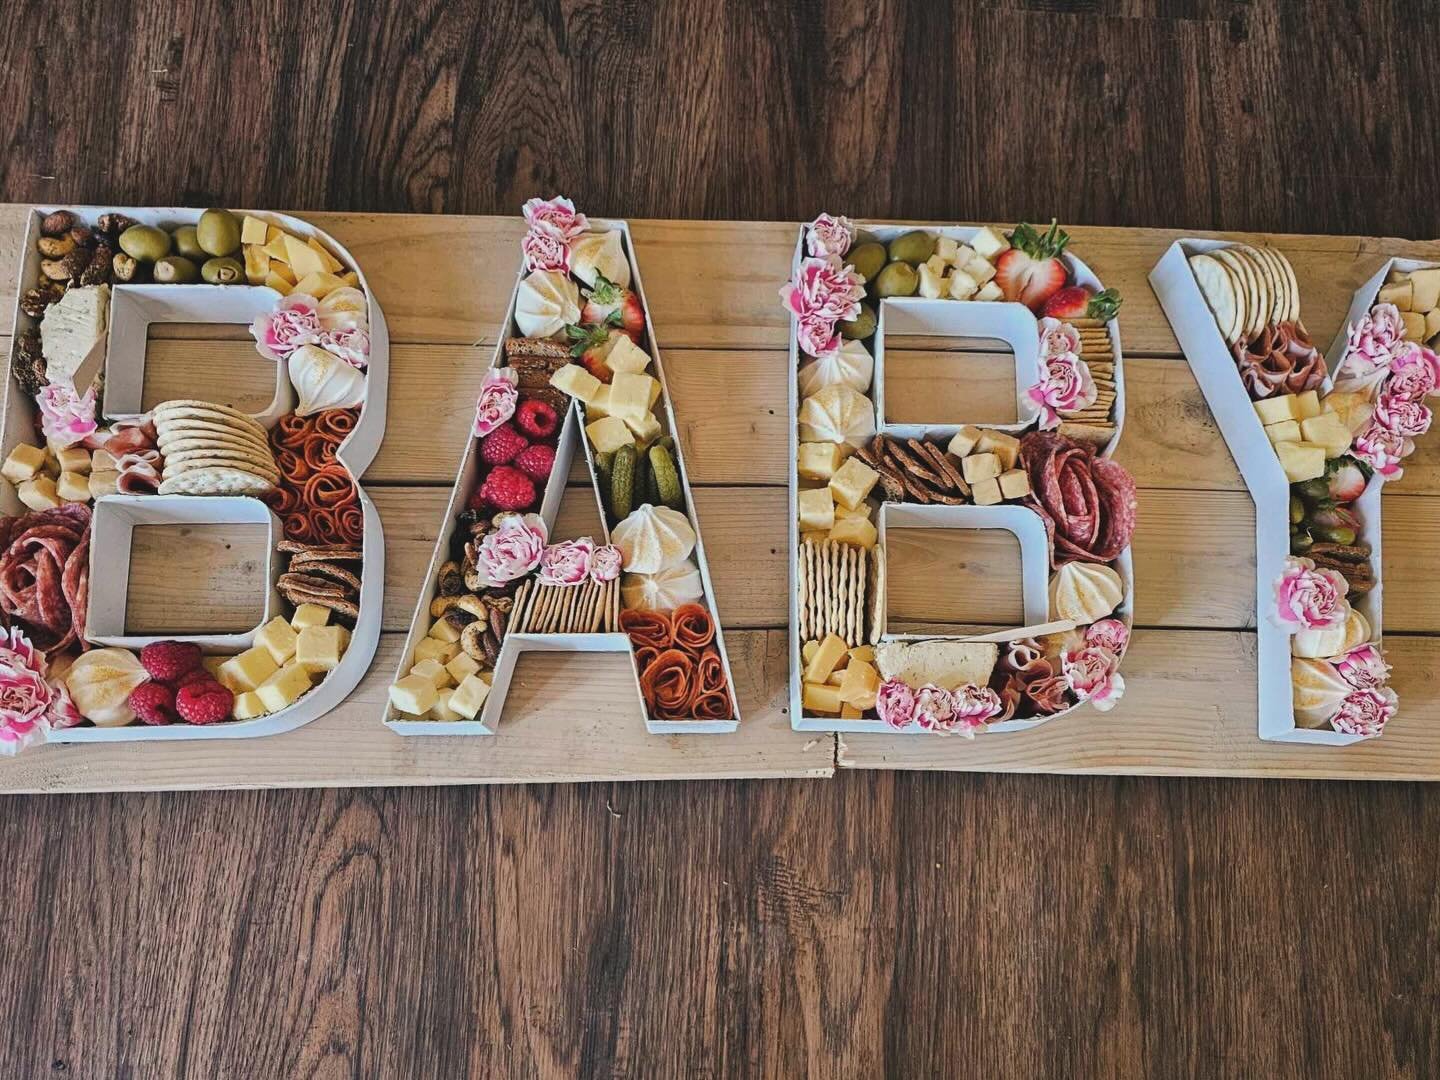 Another adorable baby shower board😍aren&rsquo;t these so fun?!

Congrats to the mama-to-be! 💕🍼

#utahgrazingtable #utahcharcuterie #utahweddings #utahcountygrazingtable #utahcountycharcuterie #utahcountyweddings